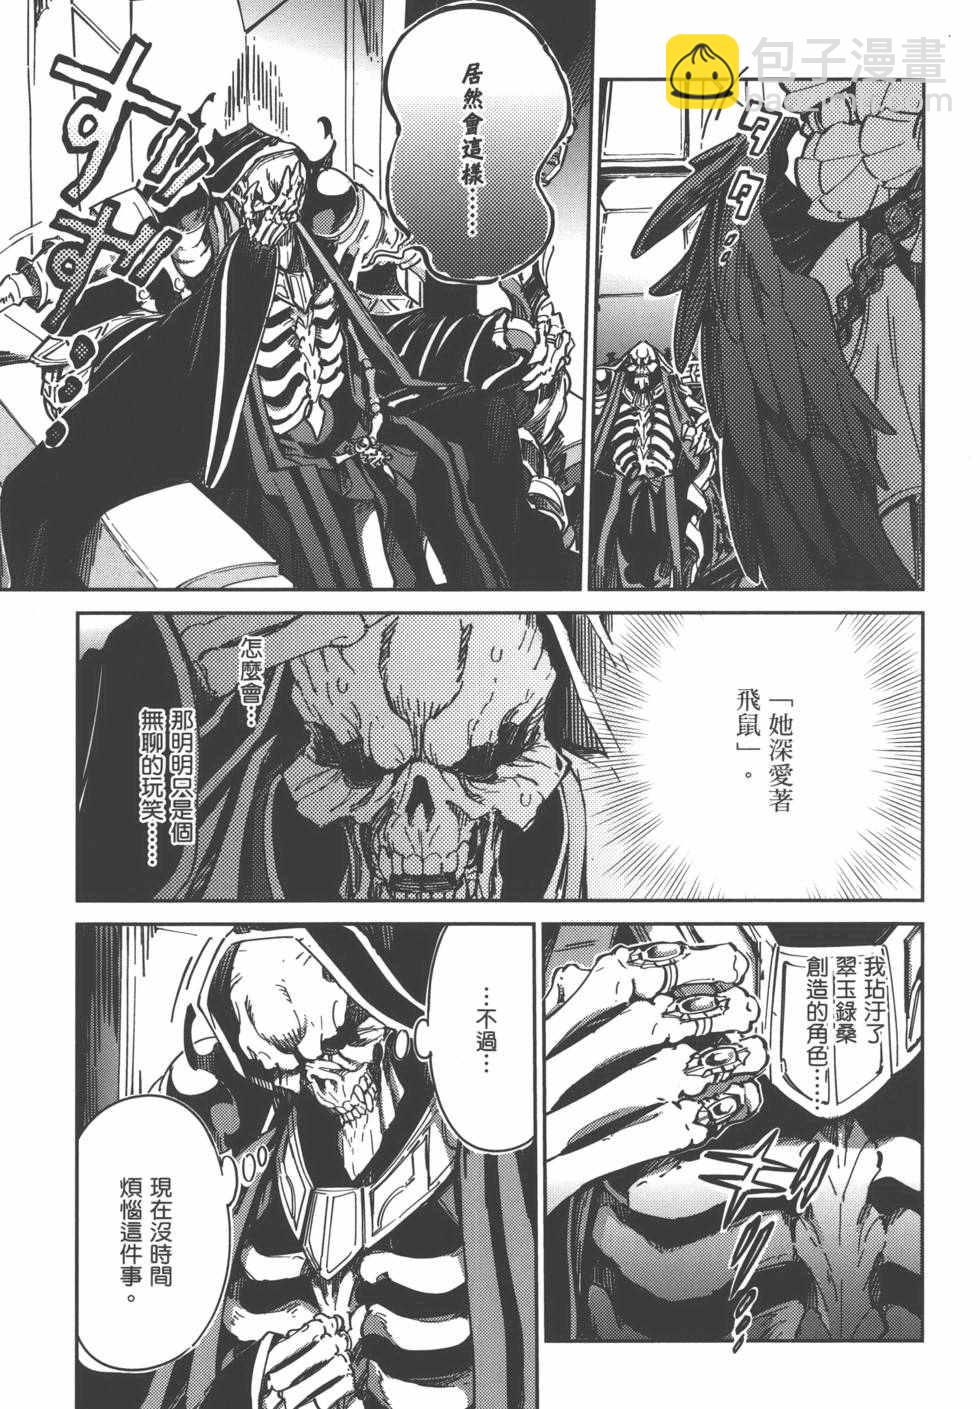 OVERLORD - 第1卷(1/4) - 1